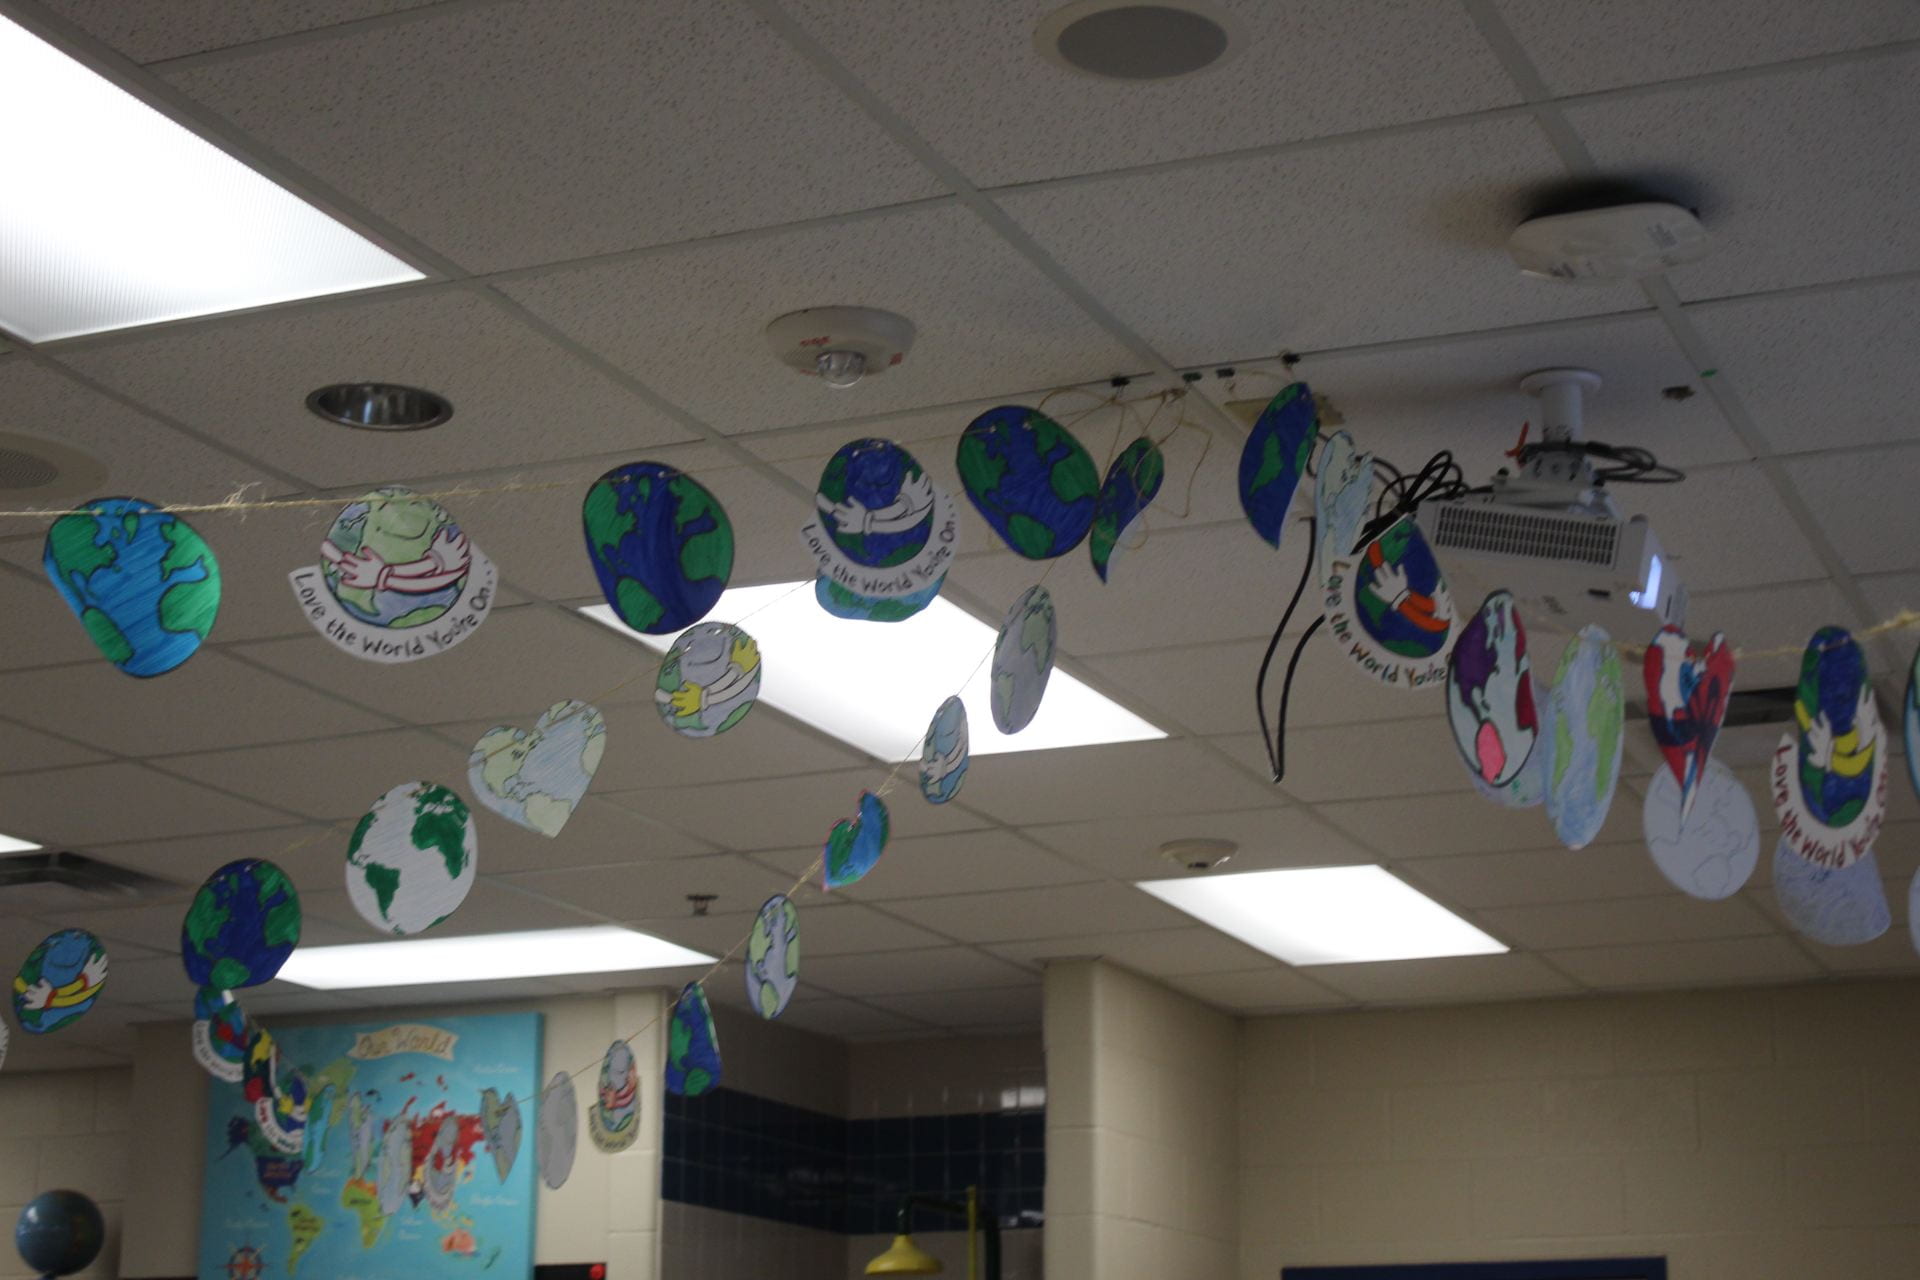 Earth decorations hanging in science classroom